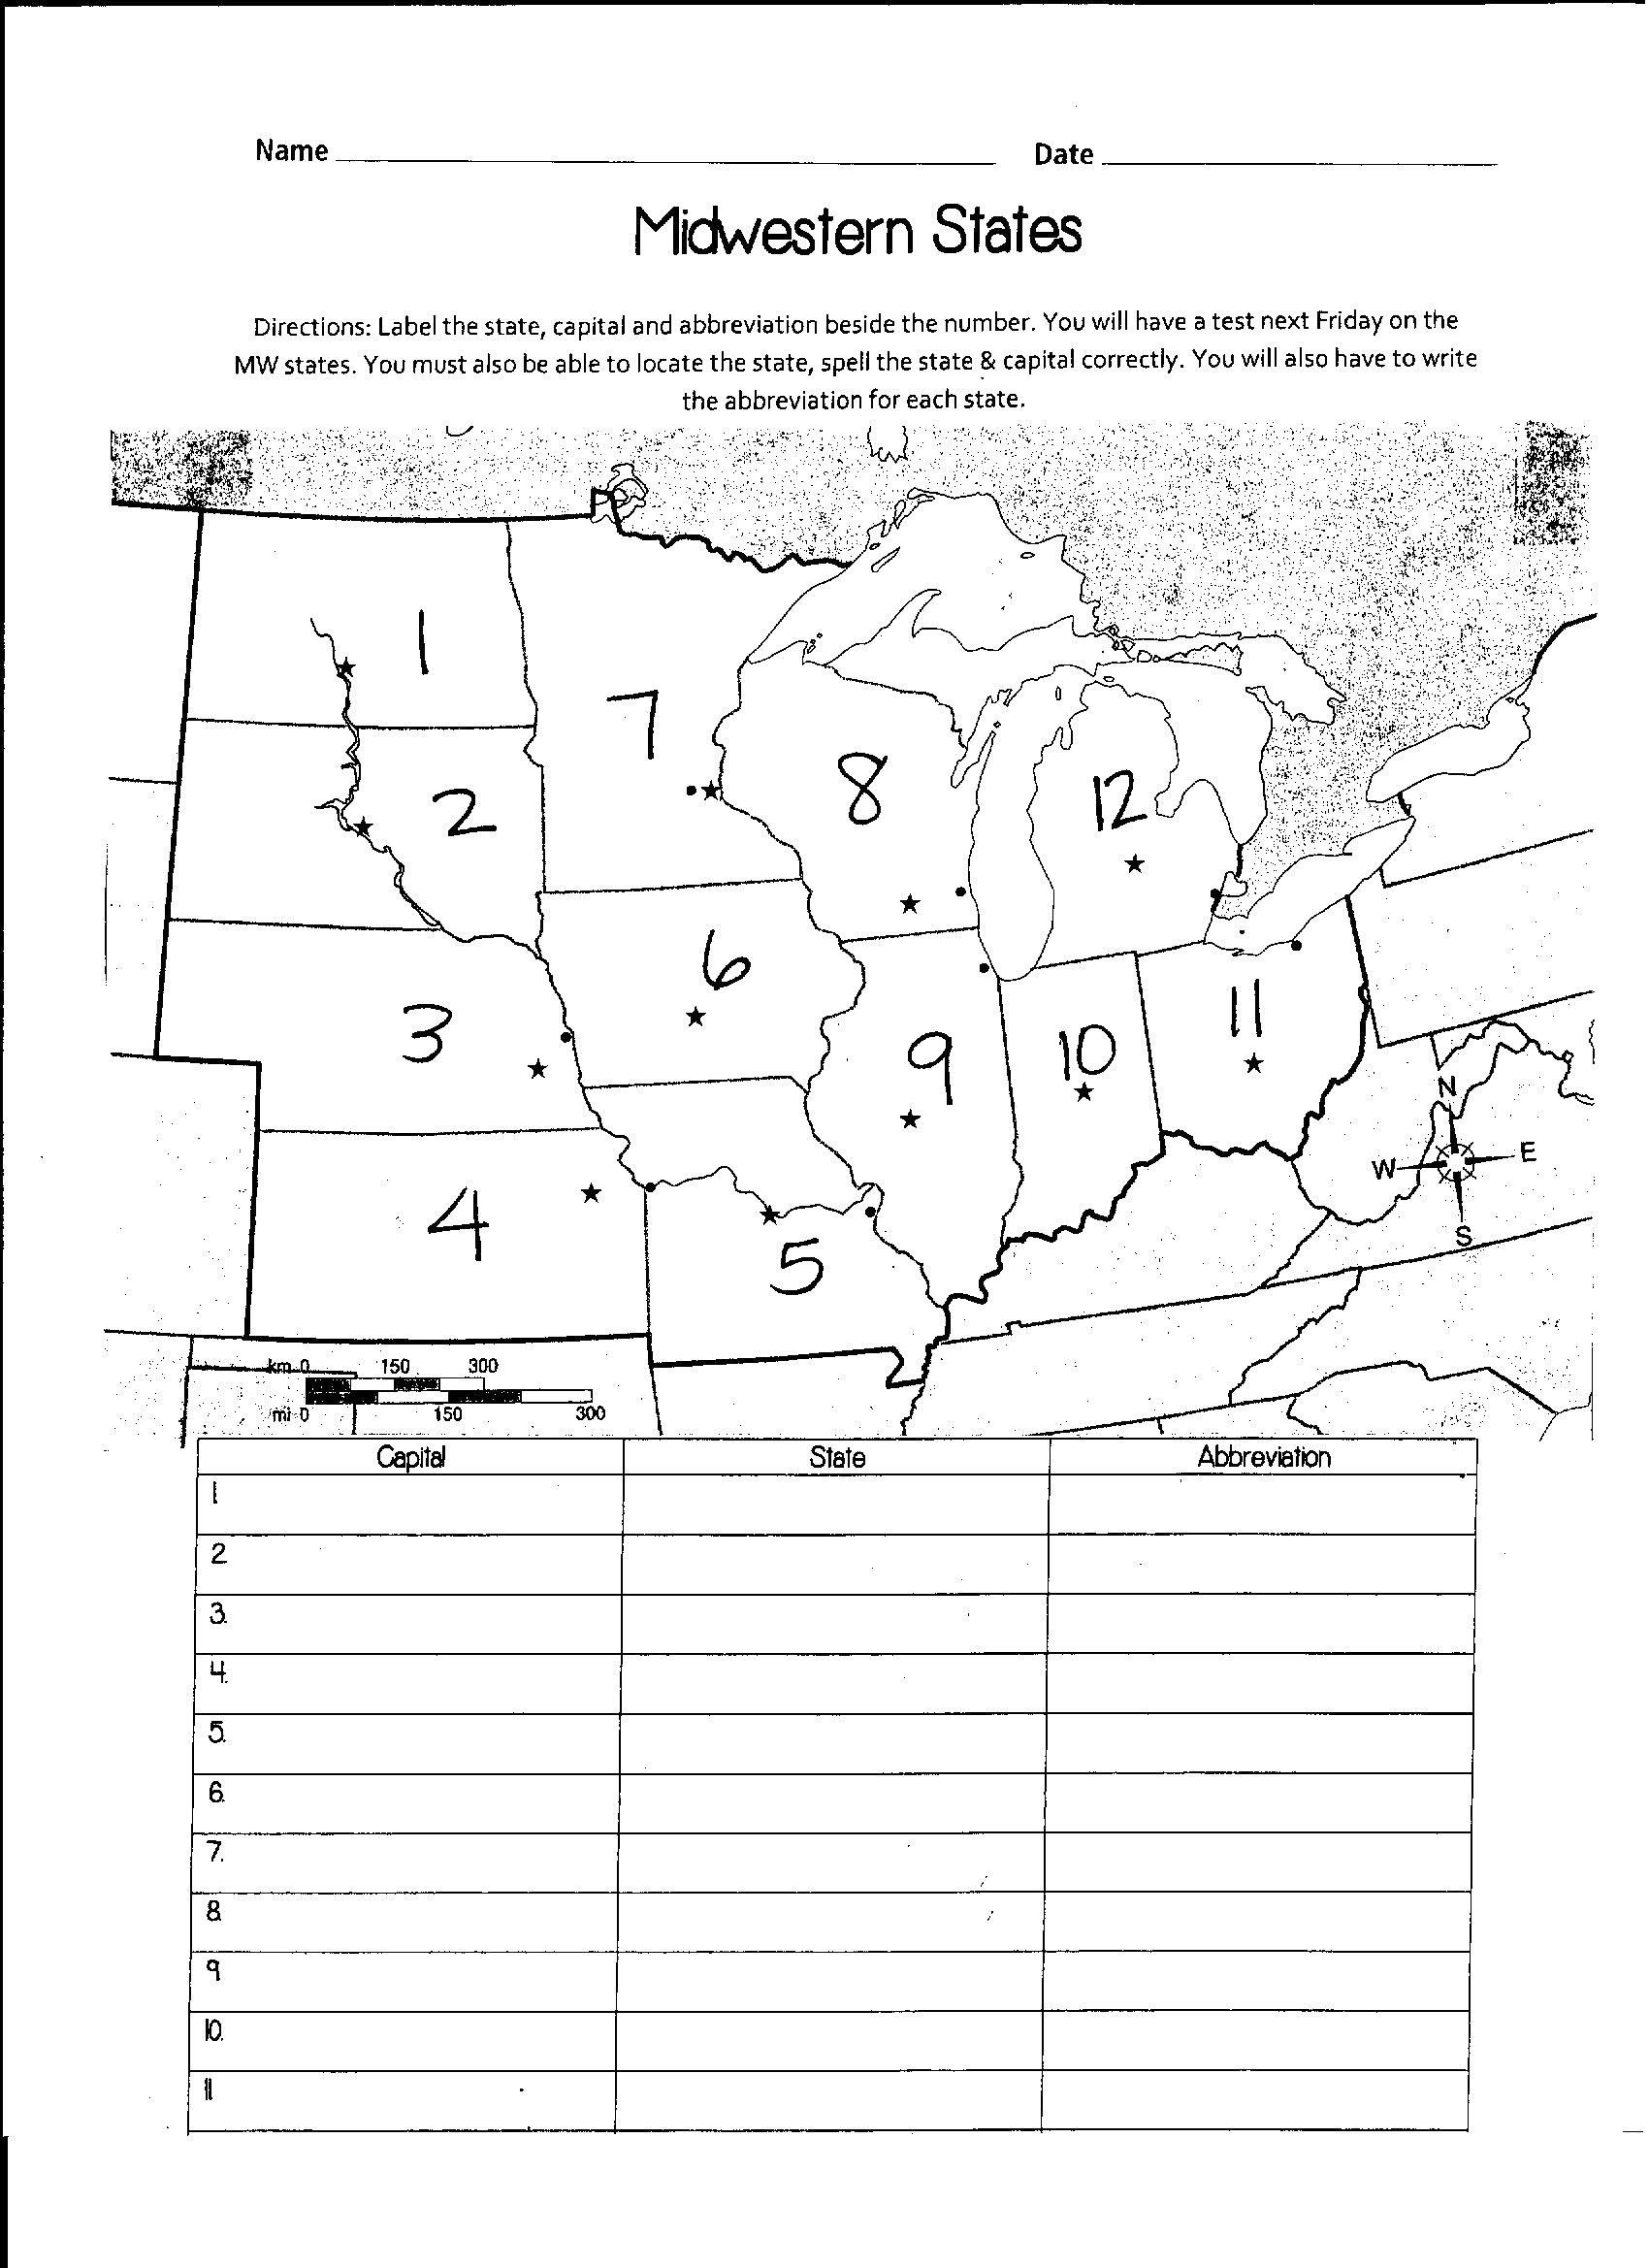 Printable States and Capitals Quiz Image Result for Numbered States Map In West Regions Of